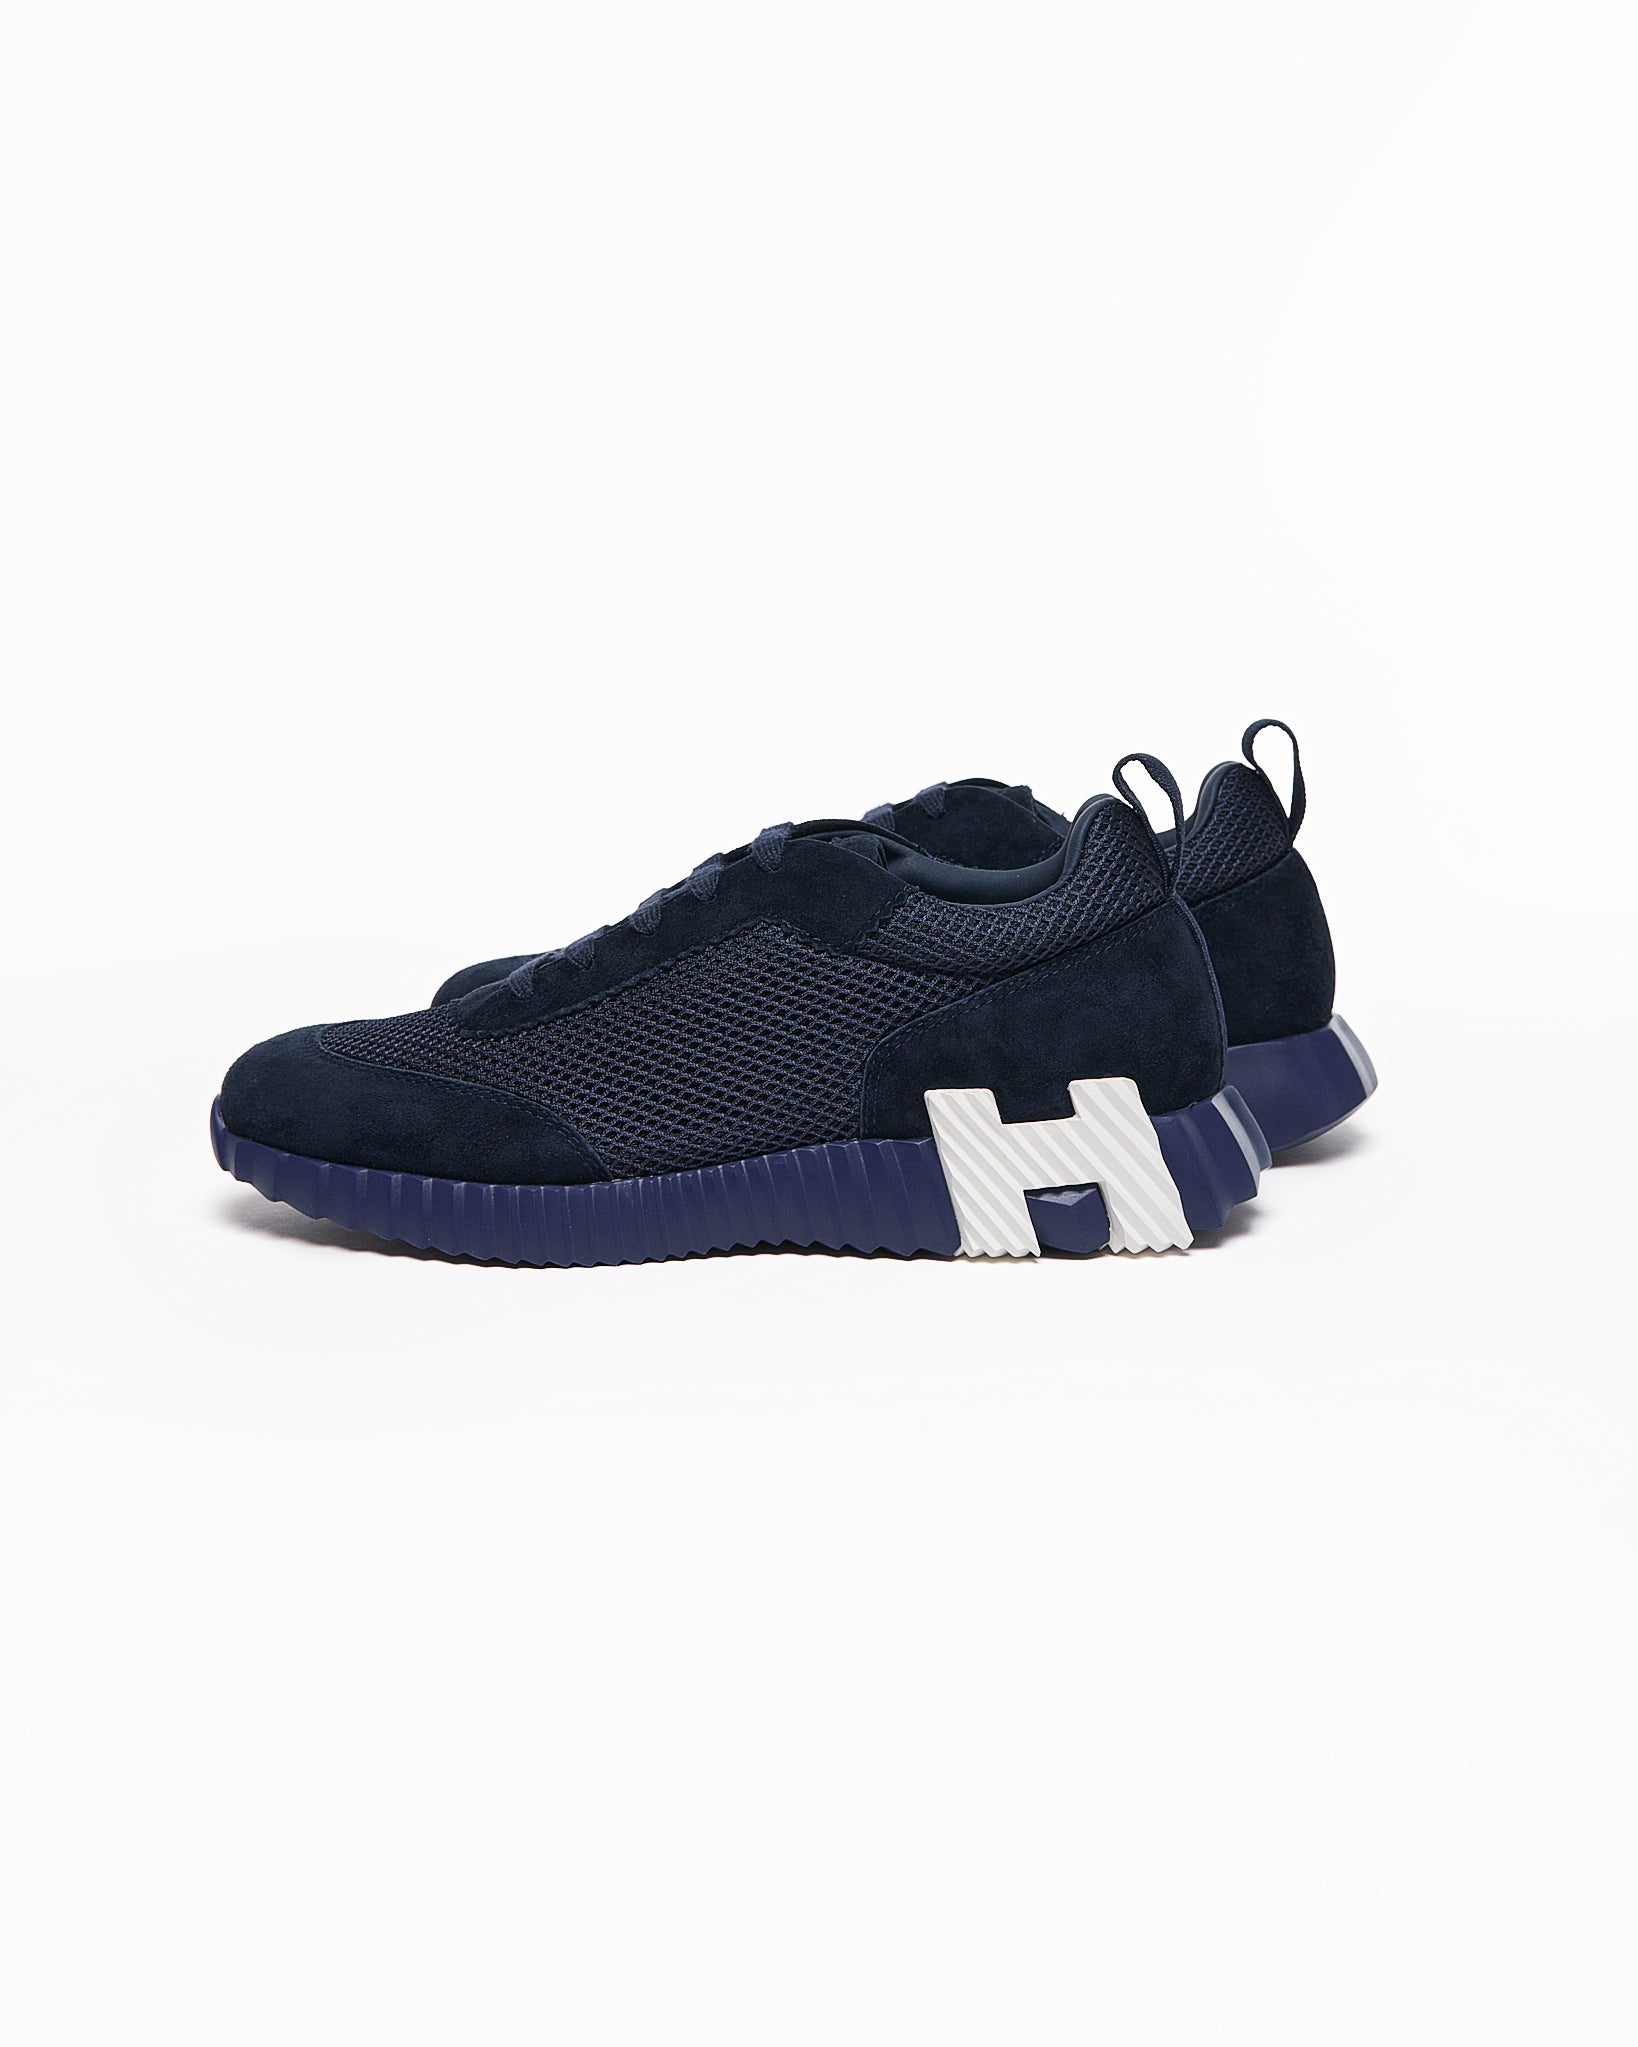 HER Bouncing Blue Sneakers Shoes 130.90